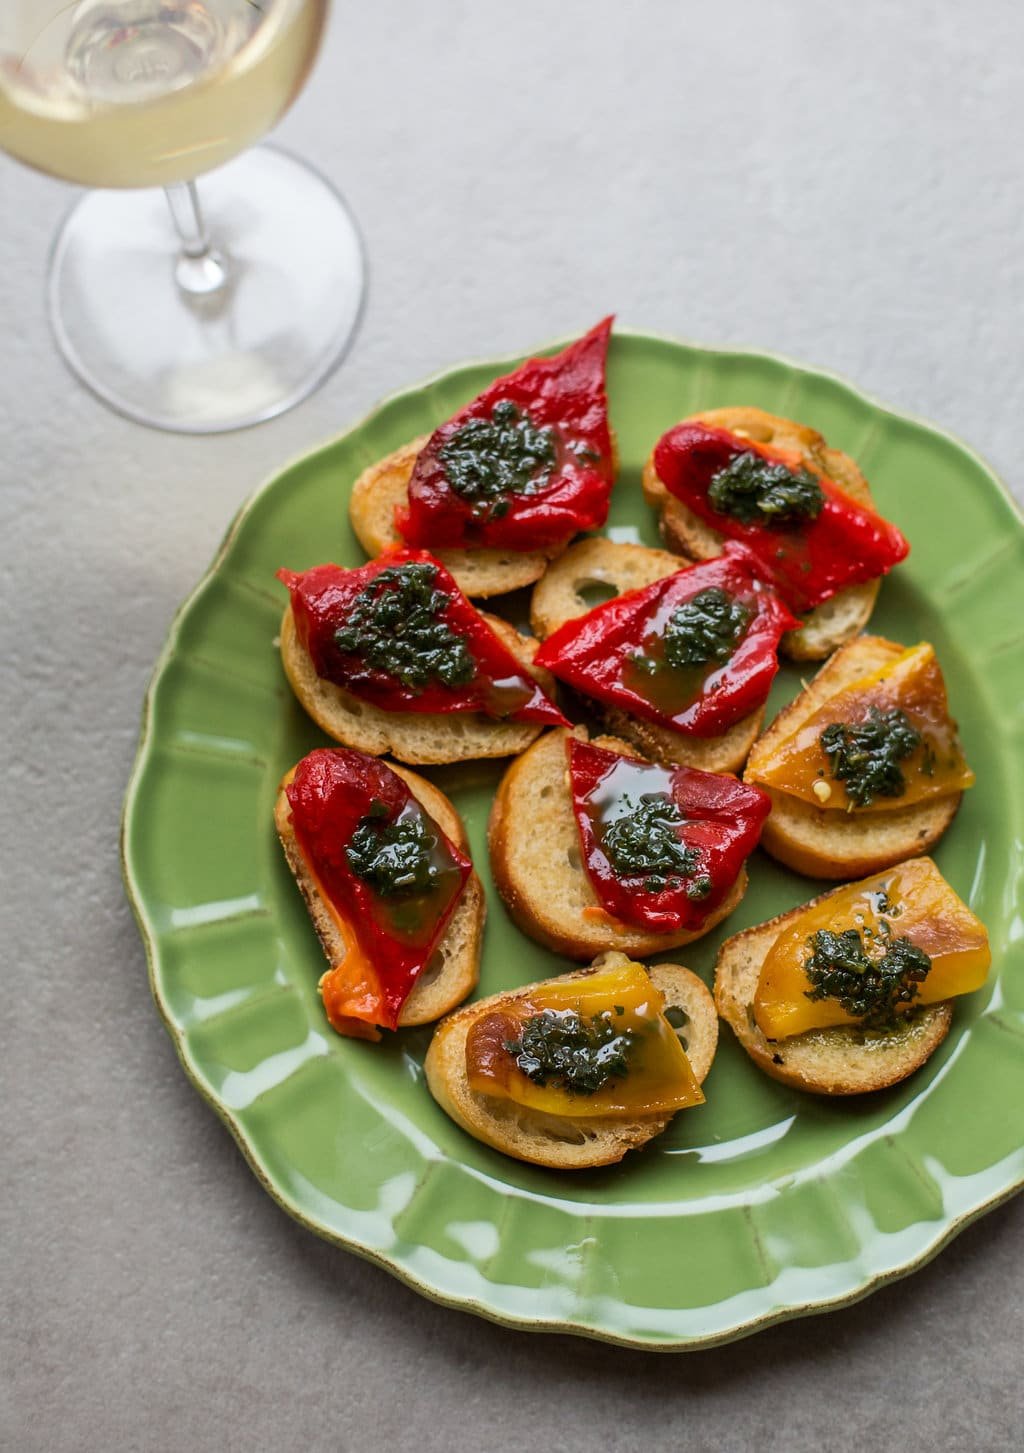 Roasted Pepper Crostini with Basil Oil on a plate/ Sarah Crowder 